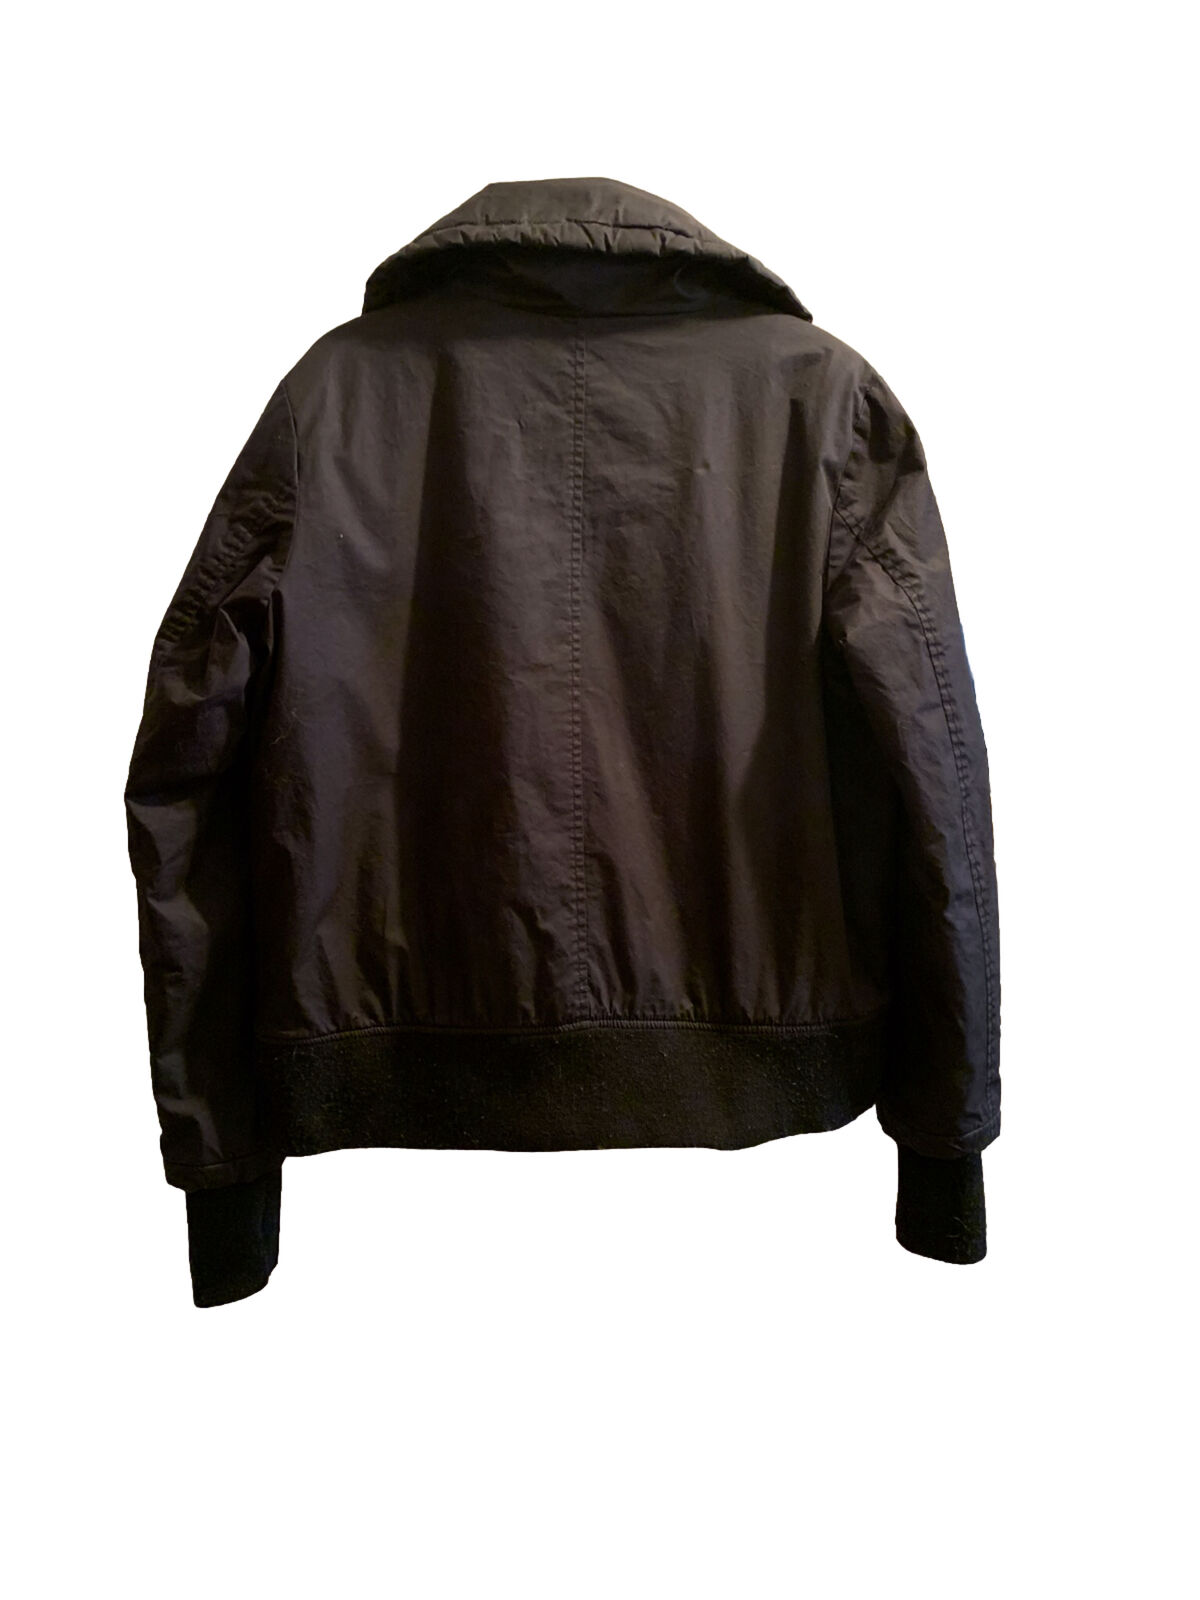 French Connection Black Jacket, Removable Faux Fu… - image 7